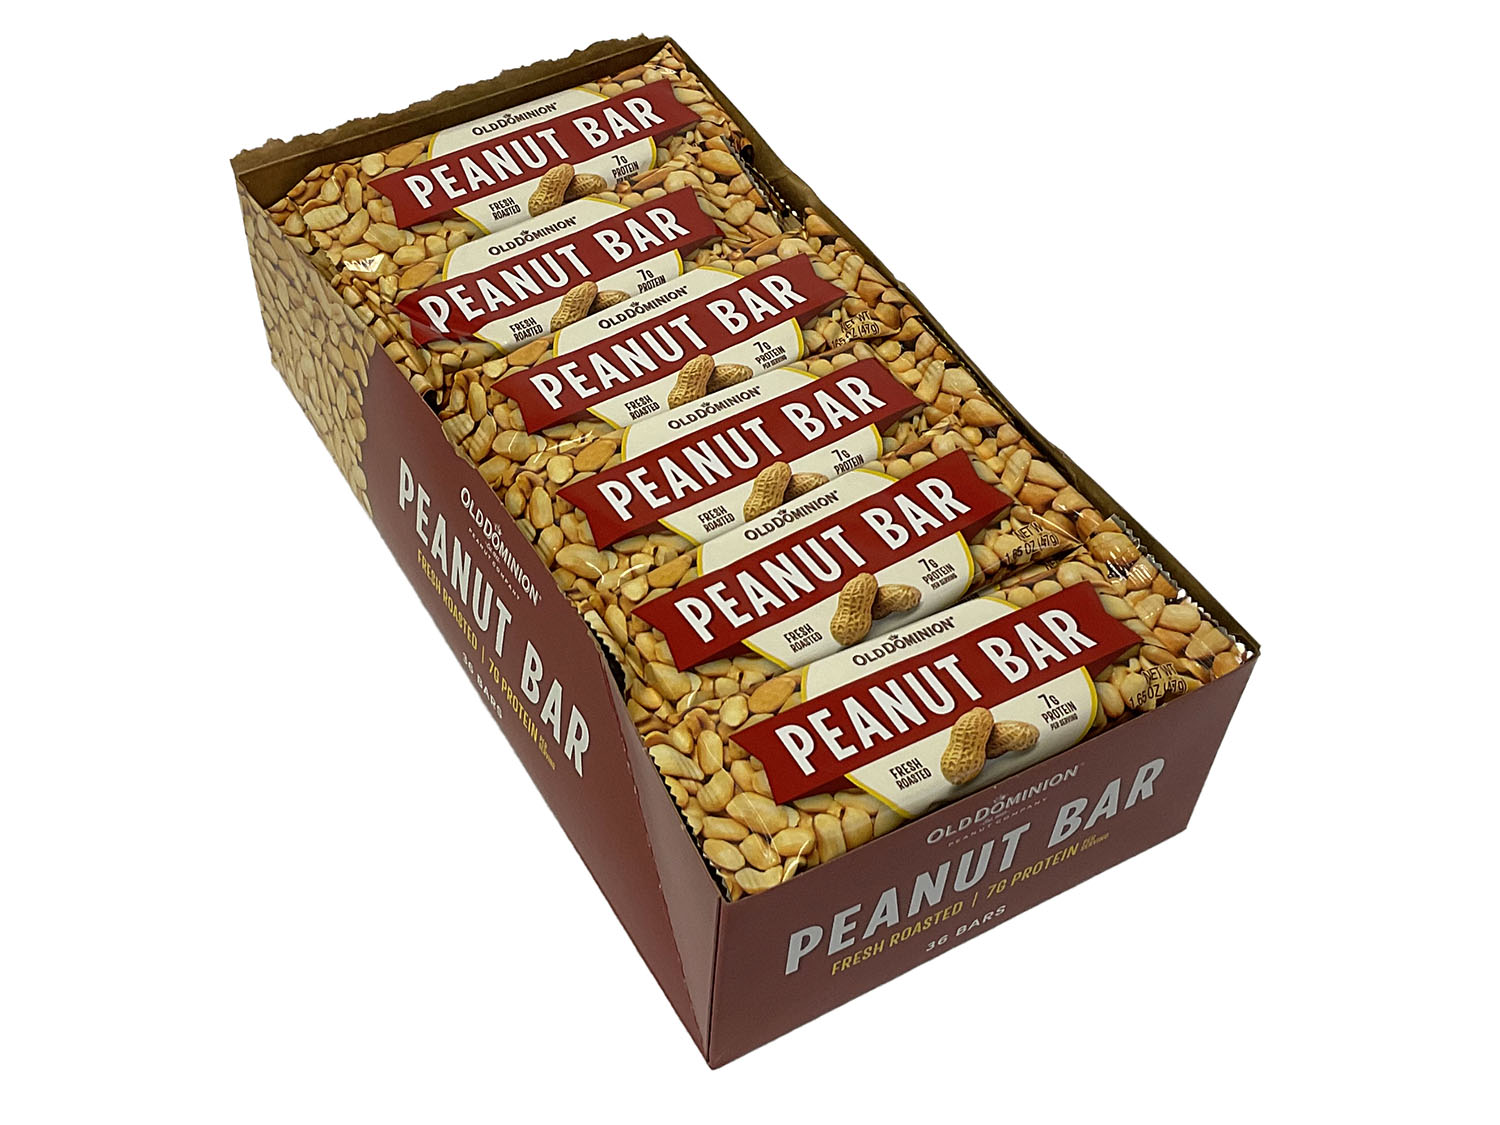 Peanut Bars by Old Dominion - 1.65 oz bar - box of 36 open